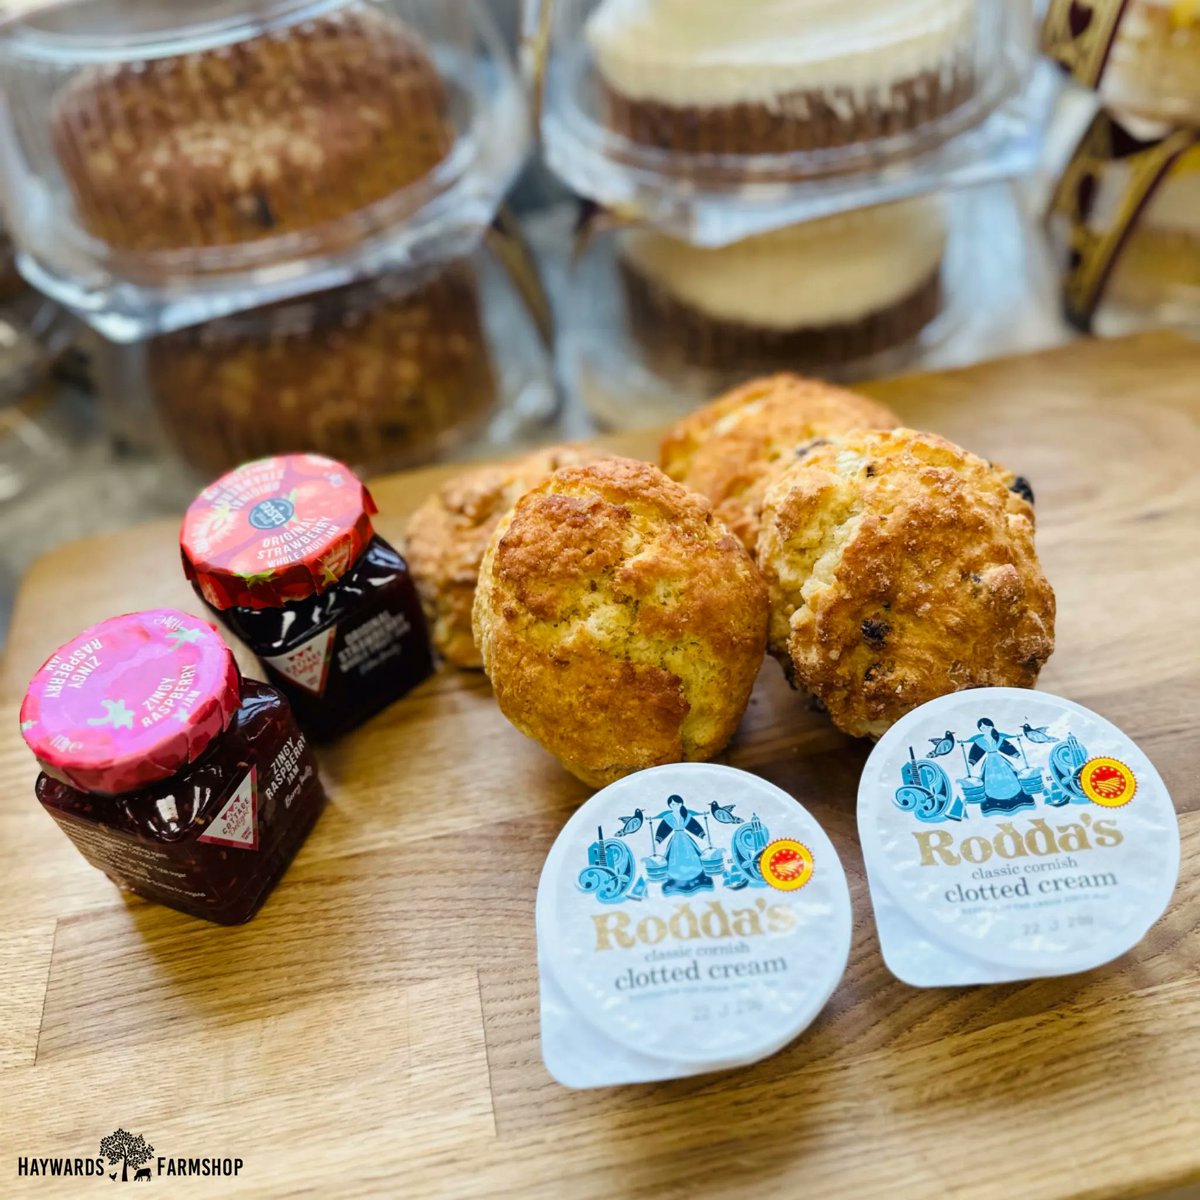 Show your appreciation & treat your mum this Mother's Day with Haywards Cream Tea! Includes homemade scones, delicious jam and Rodda’s clotted cream. Available through our online store! #MothersDay #HomemadeScones #Jam #ClottedCream #TreatYourMum #supportlocal #haywards1990